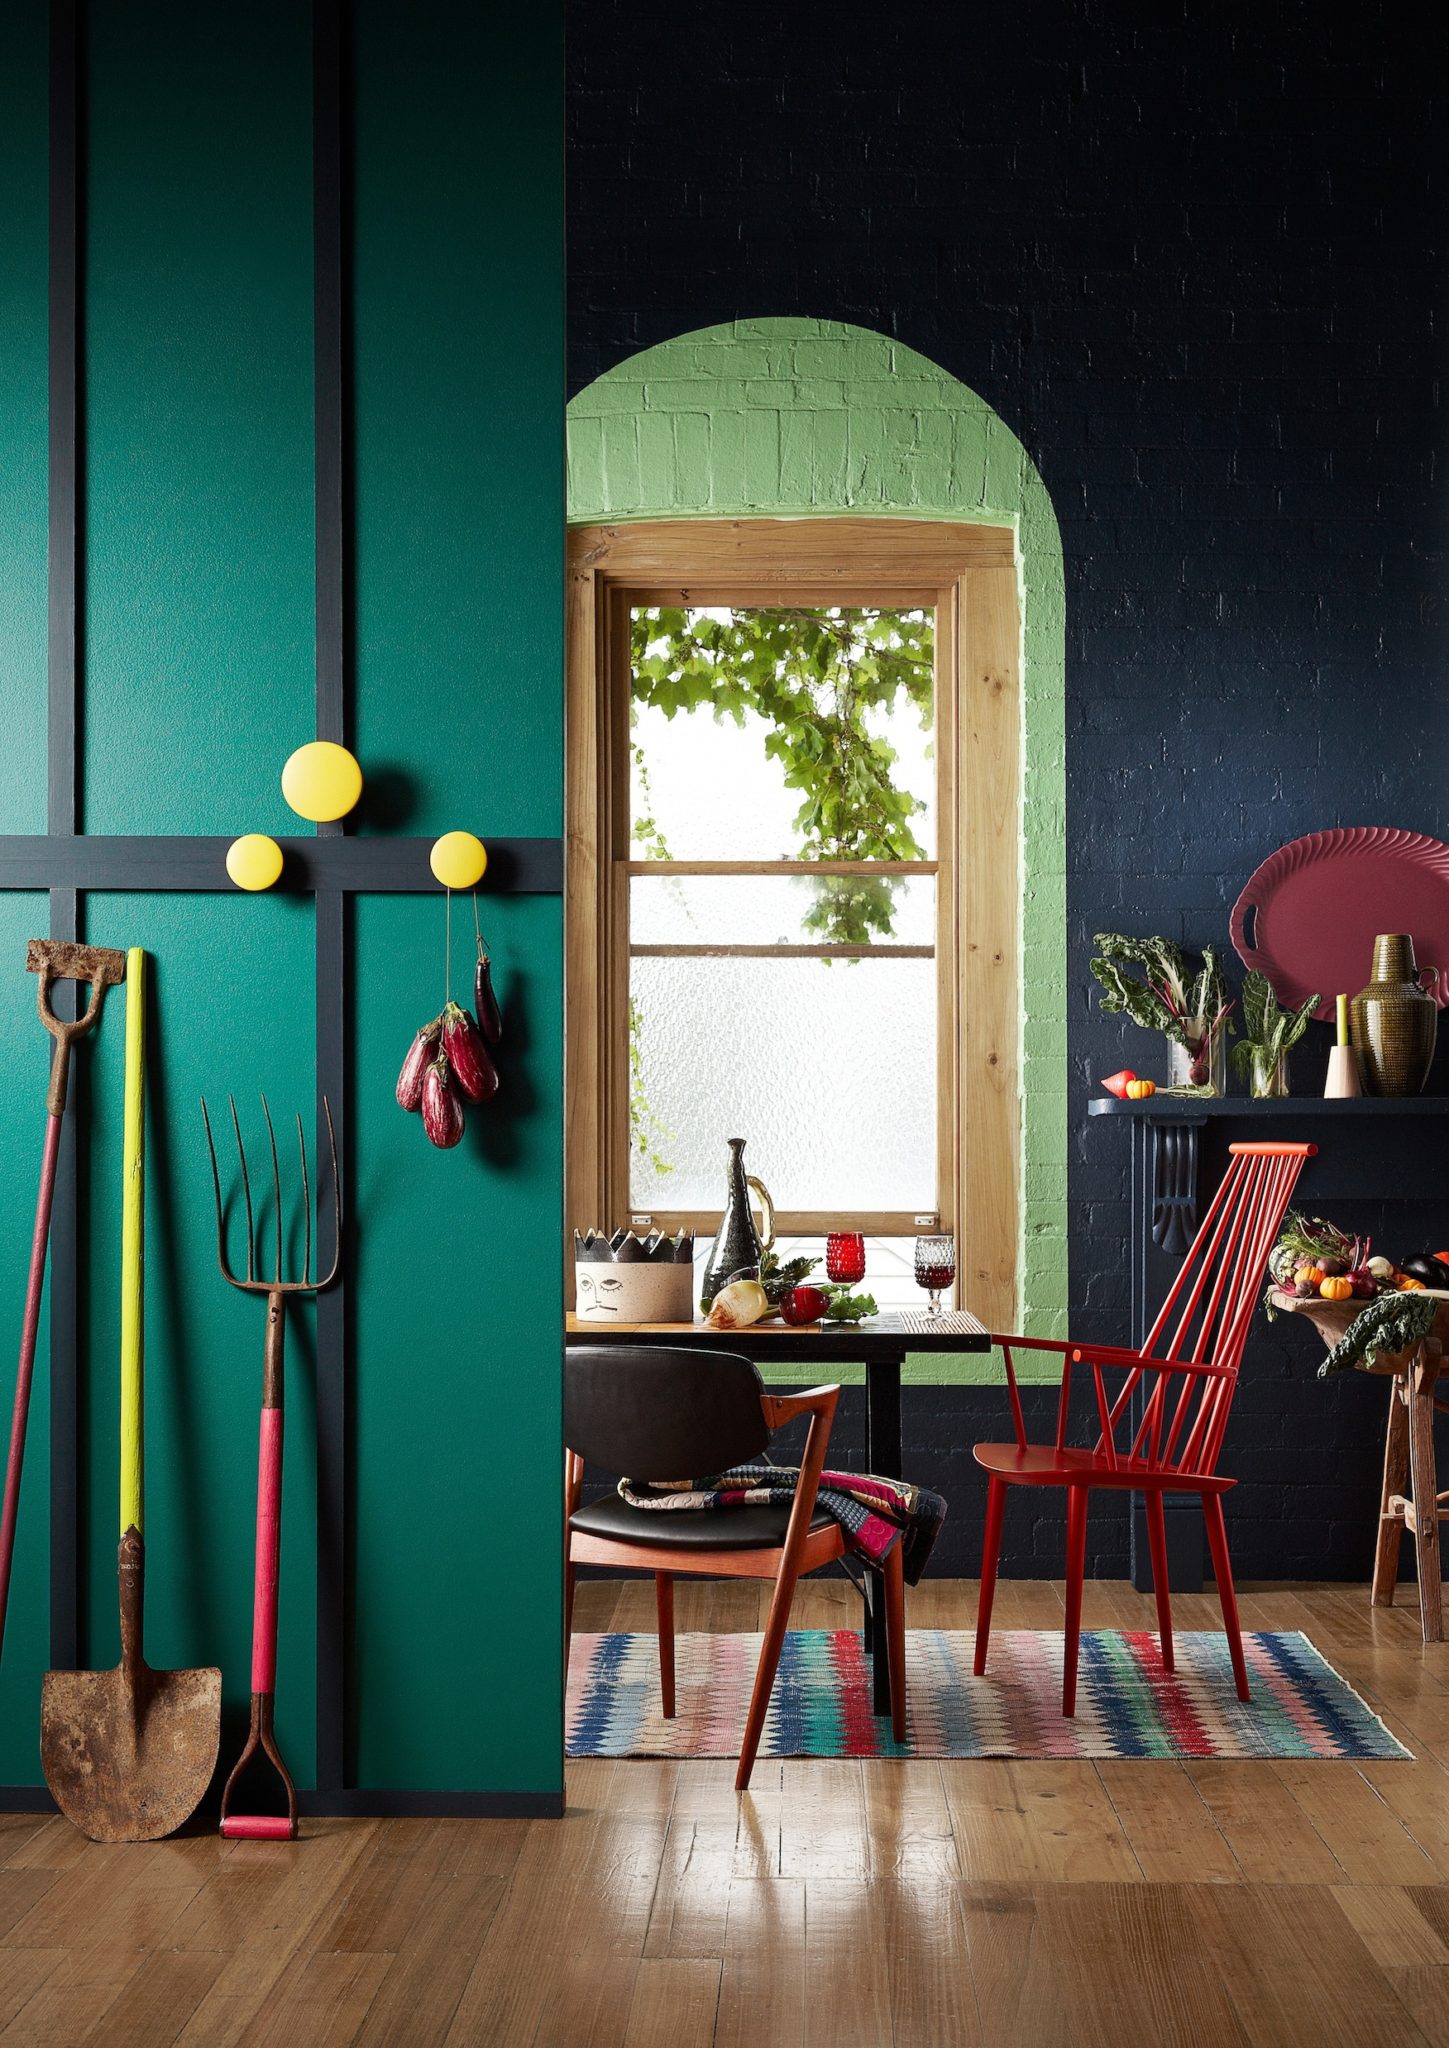 Dulux Australia Interior, Inspired by Gorman's 2014 AW Collection, Room named Harvest, Image credit Mike Baker